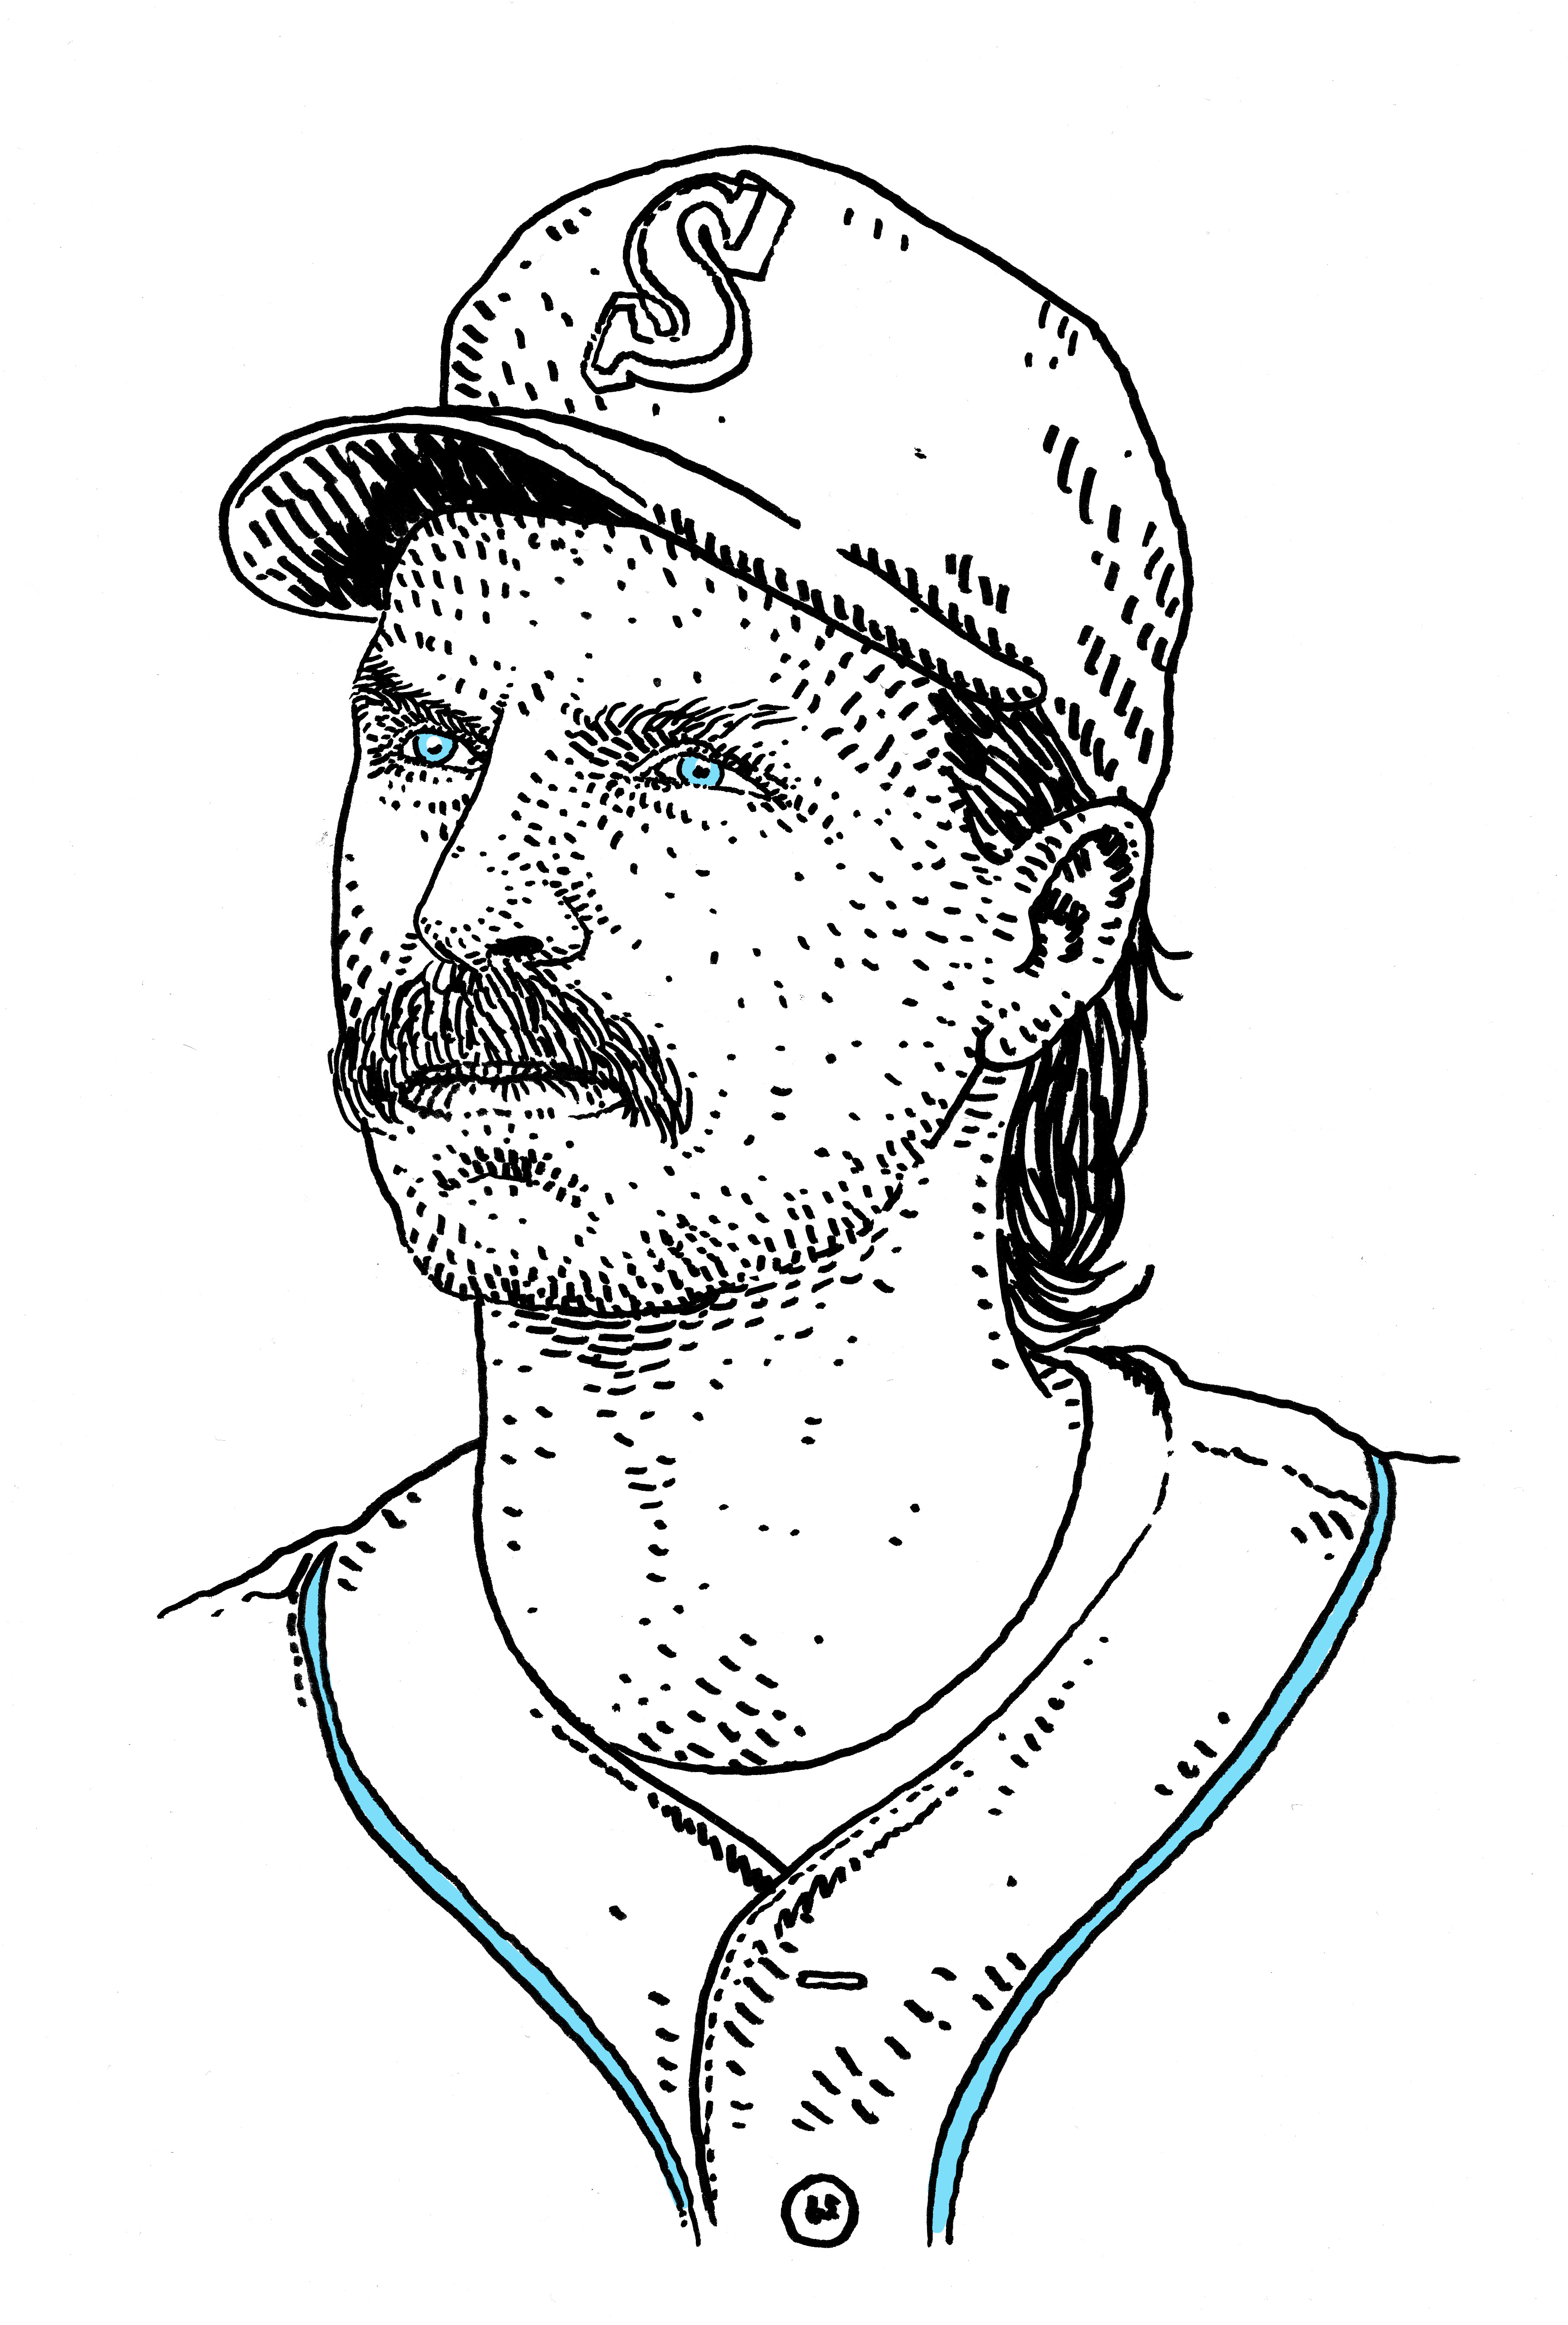 Randy Johnson Finds The Zone